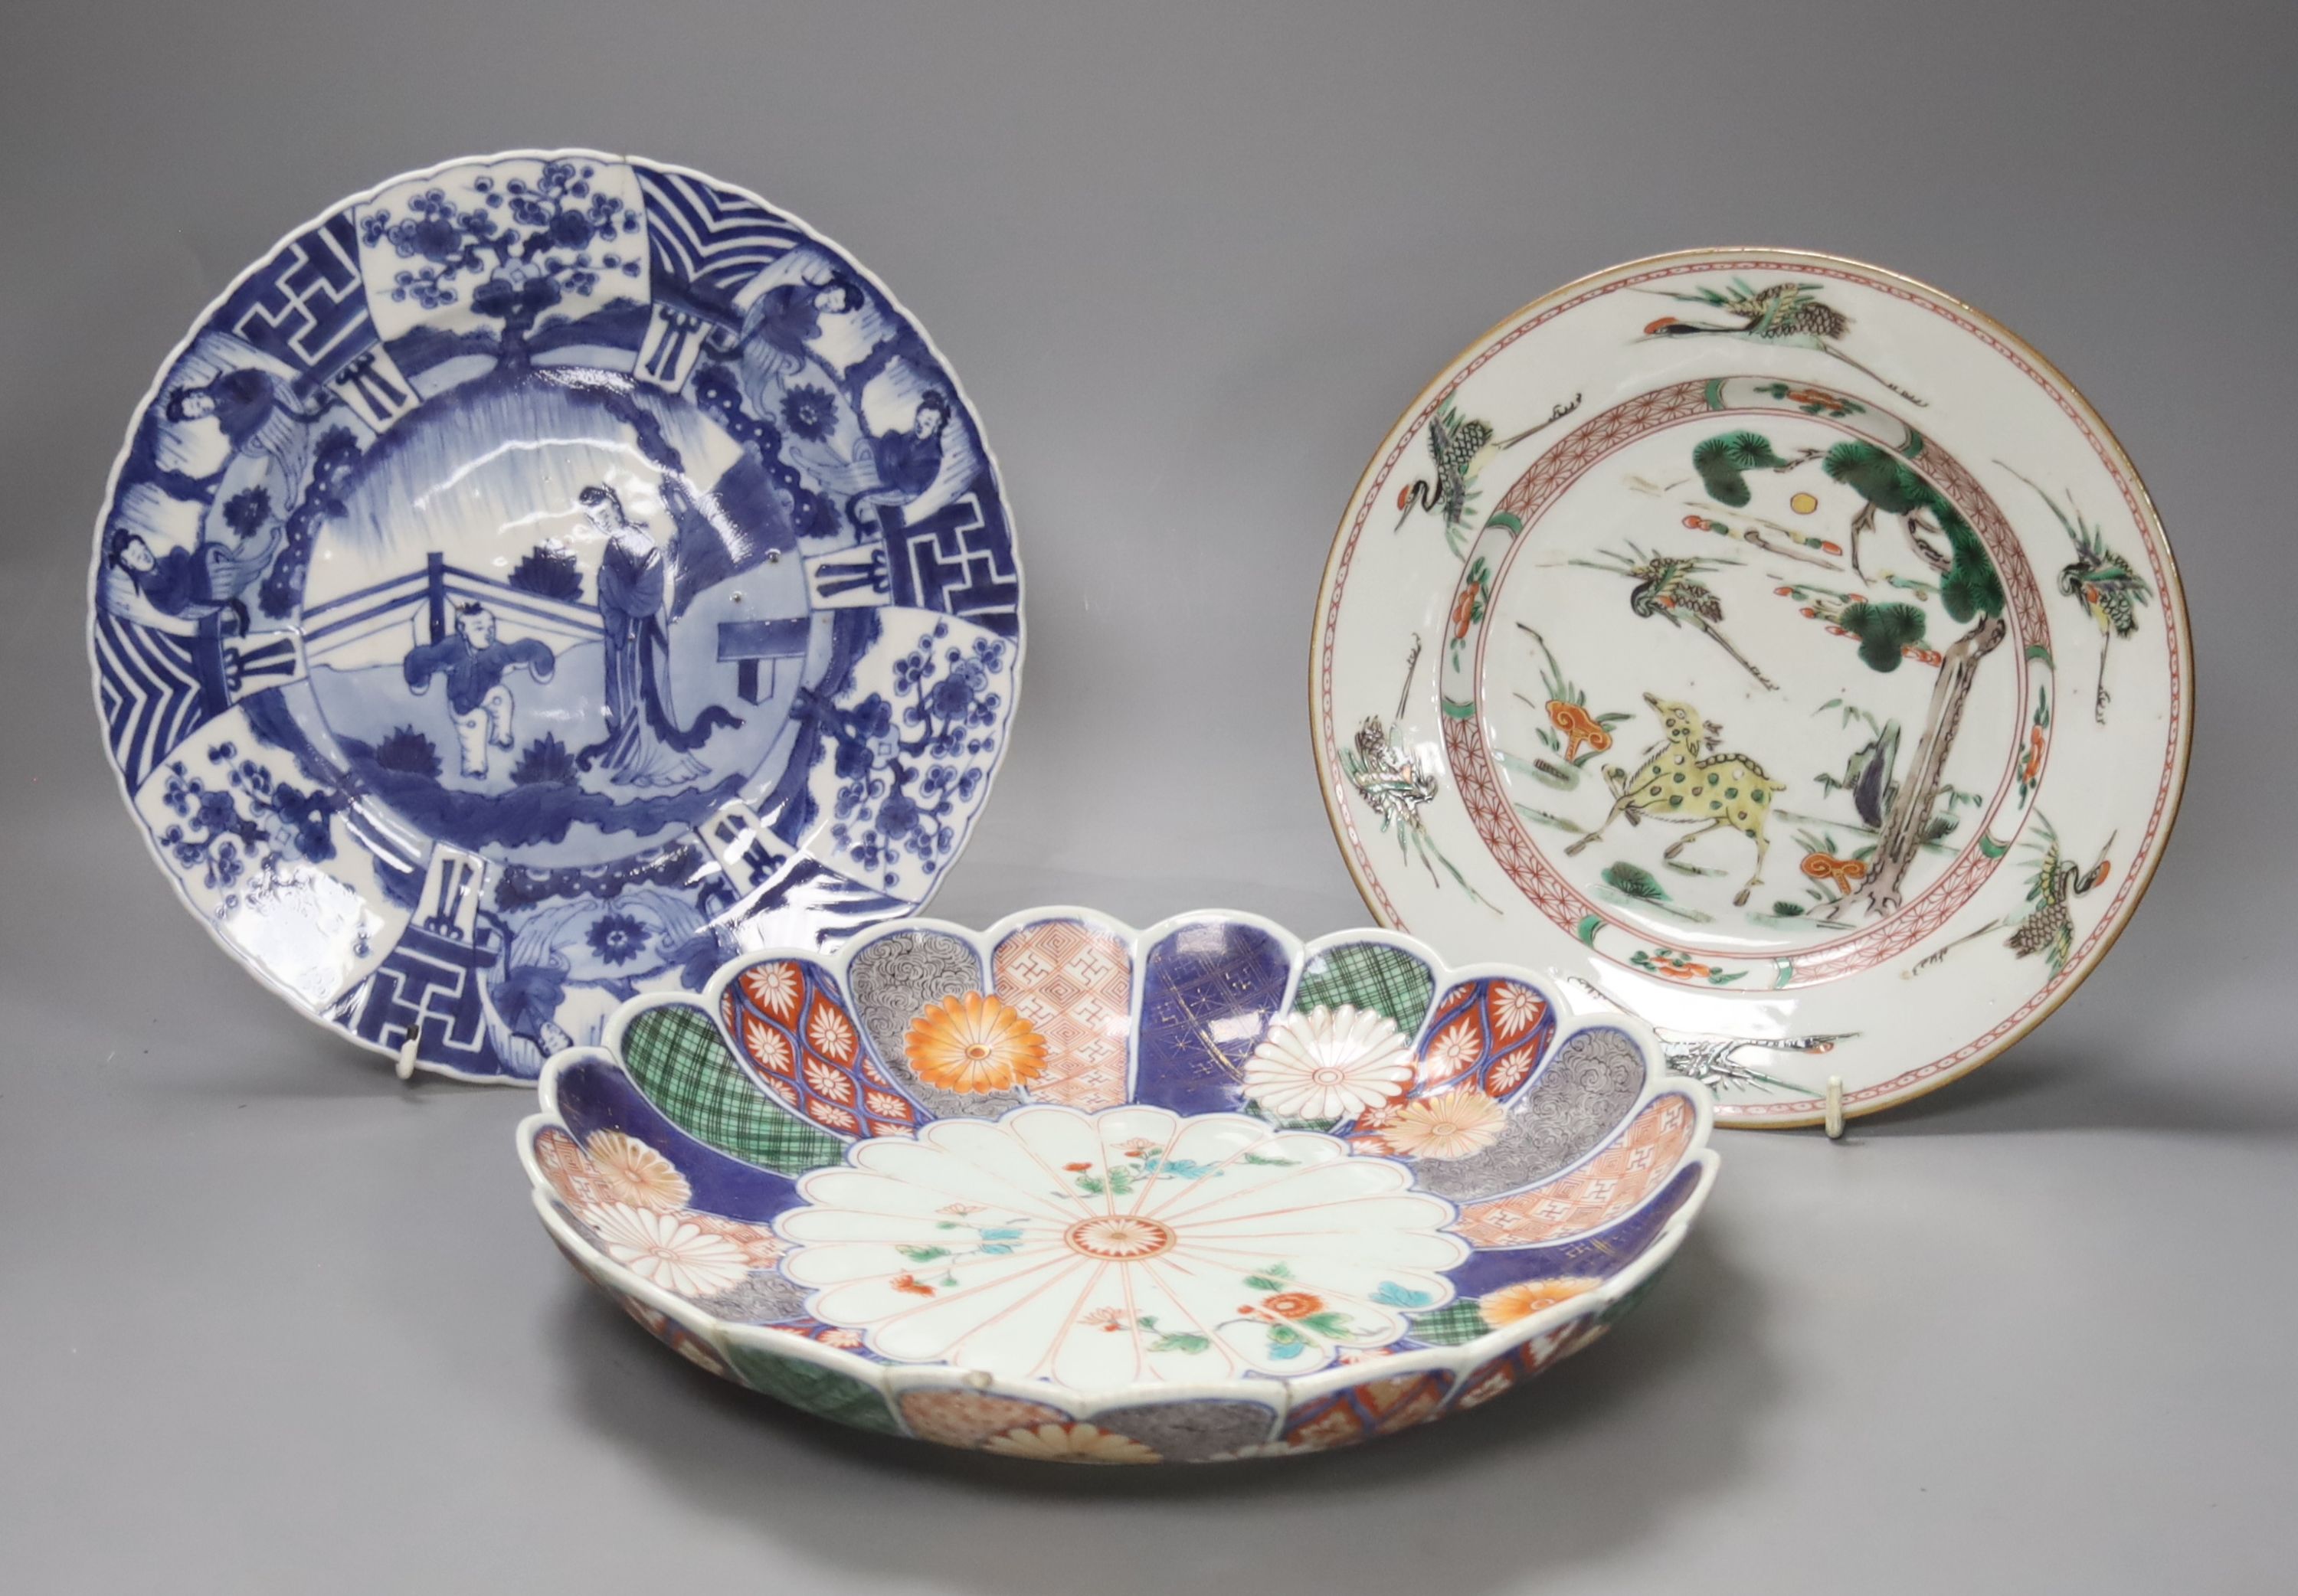 A Chinese Kangxi famille verte plate, decorated with a deer, a 19th century Chinese blue and white plate and an Imari scalloped dish, c.1850